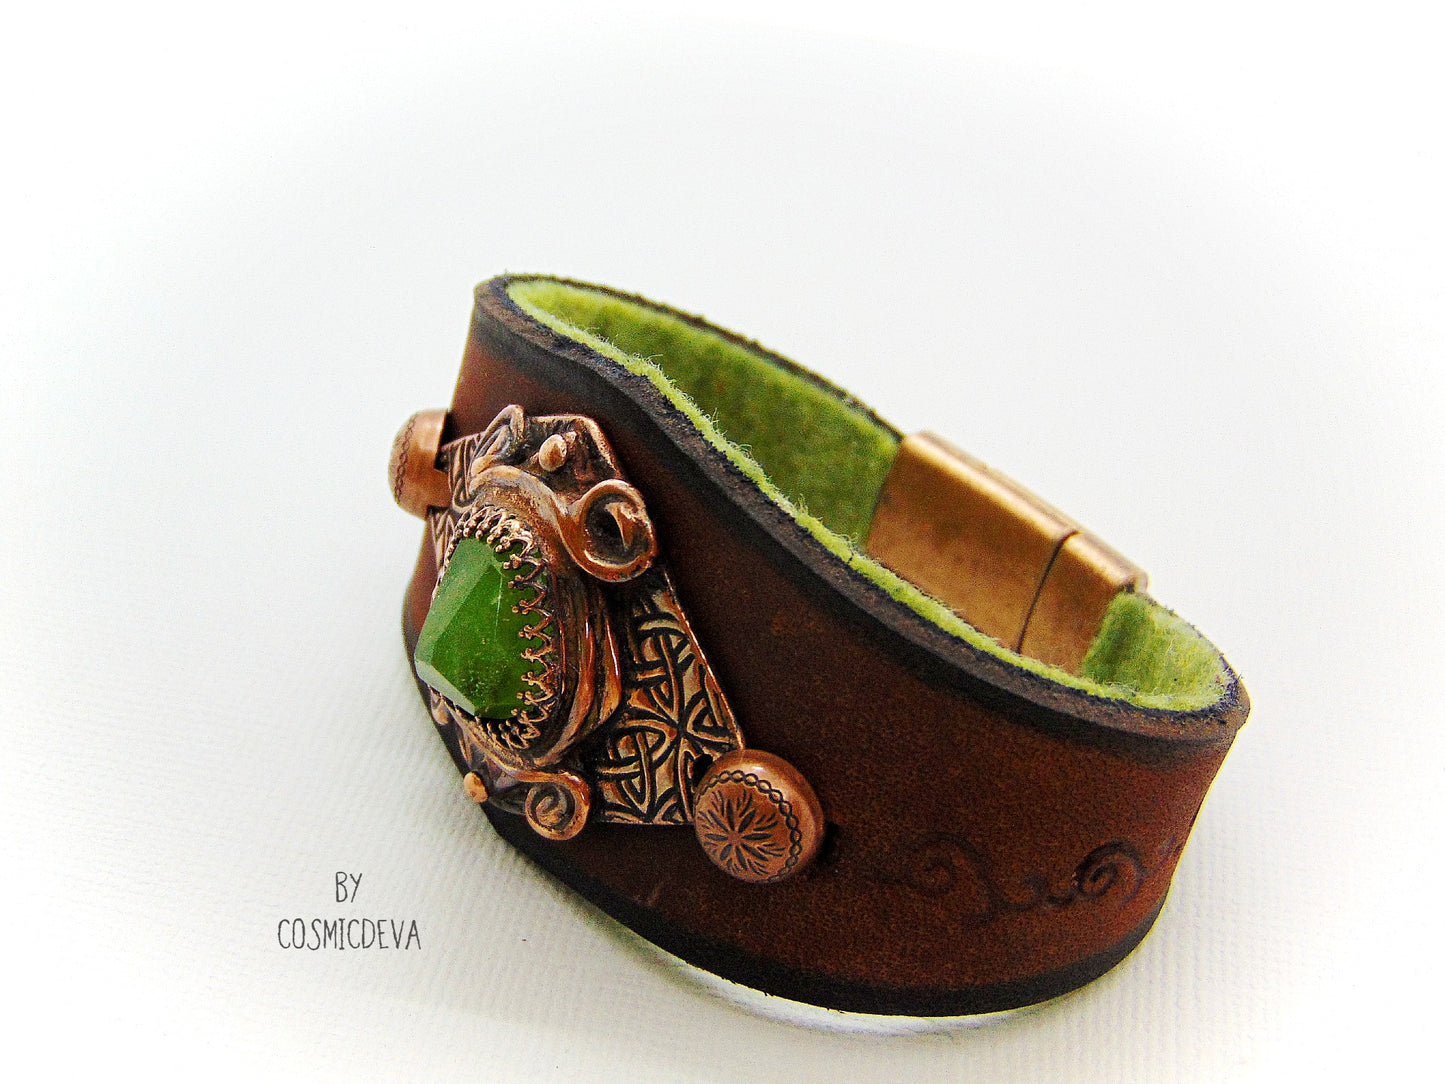 One of a kind handcrafted leather cuff bracelet made of hand cut earthy brown dyed veg tan leather. The focal point is a high quality natural raw green peridot gemstone in a bezel setting on a Celtic design textured solid copper base. The inside of the leather bracelet is lined with olive green felt for your comfort. cosmicdeva